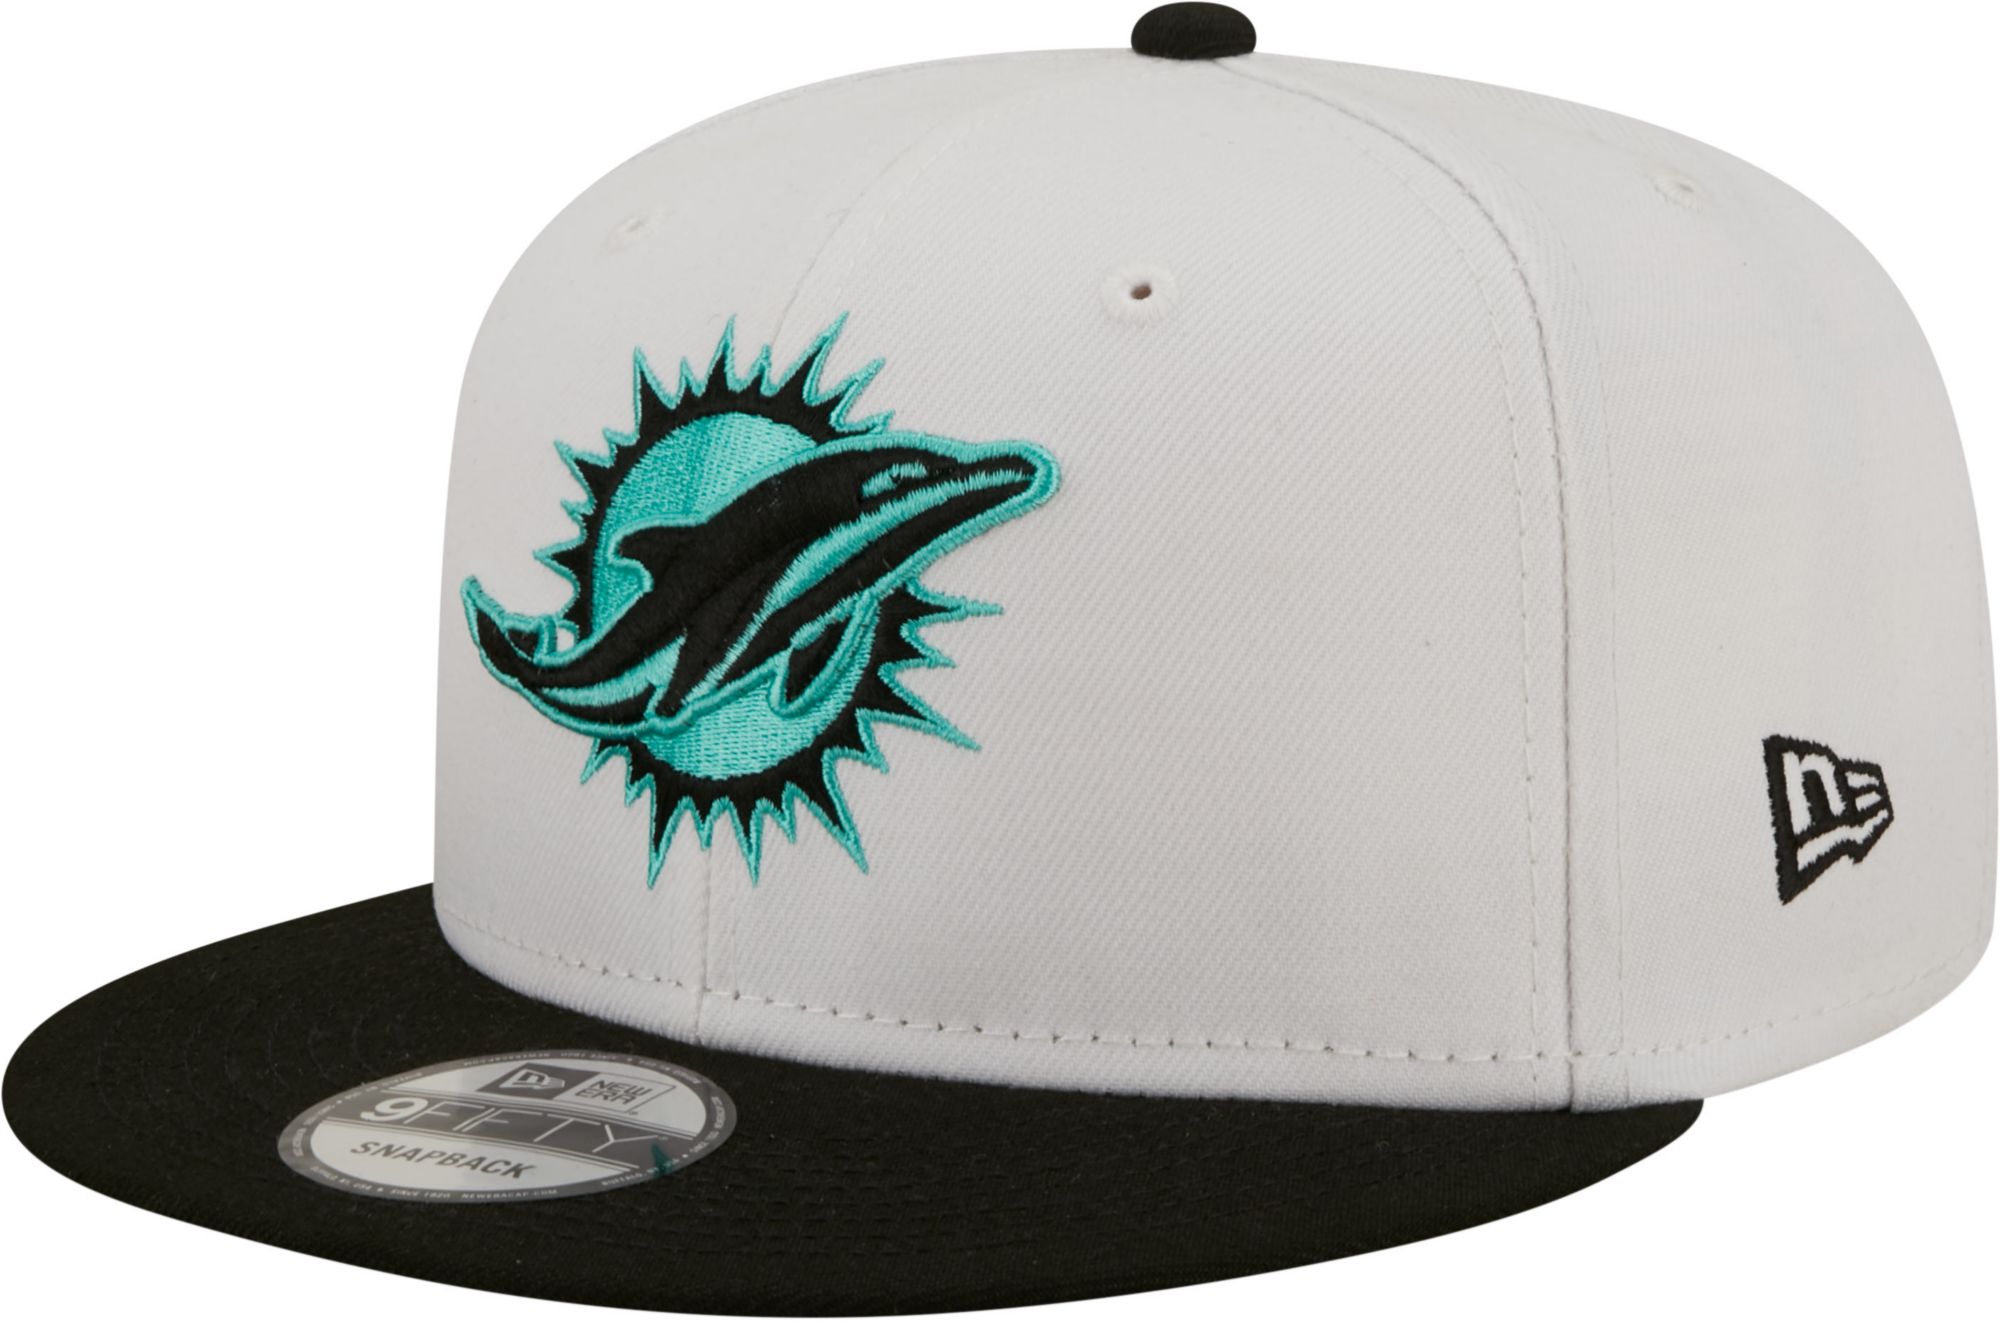 New Era / Men's Miami Dolphins Color Pack 9Fifty White Adjustable Hat